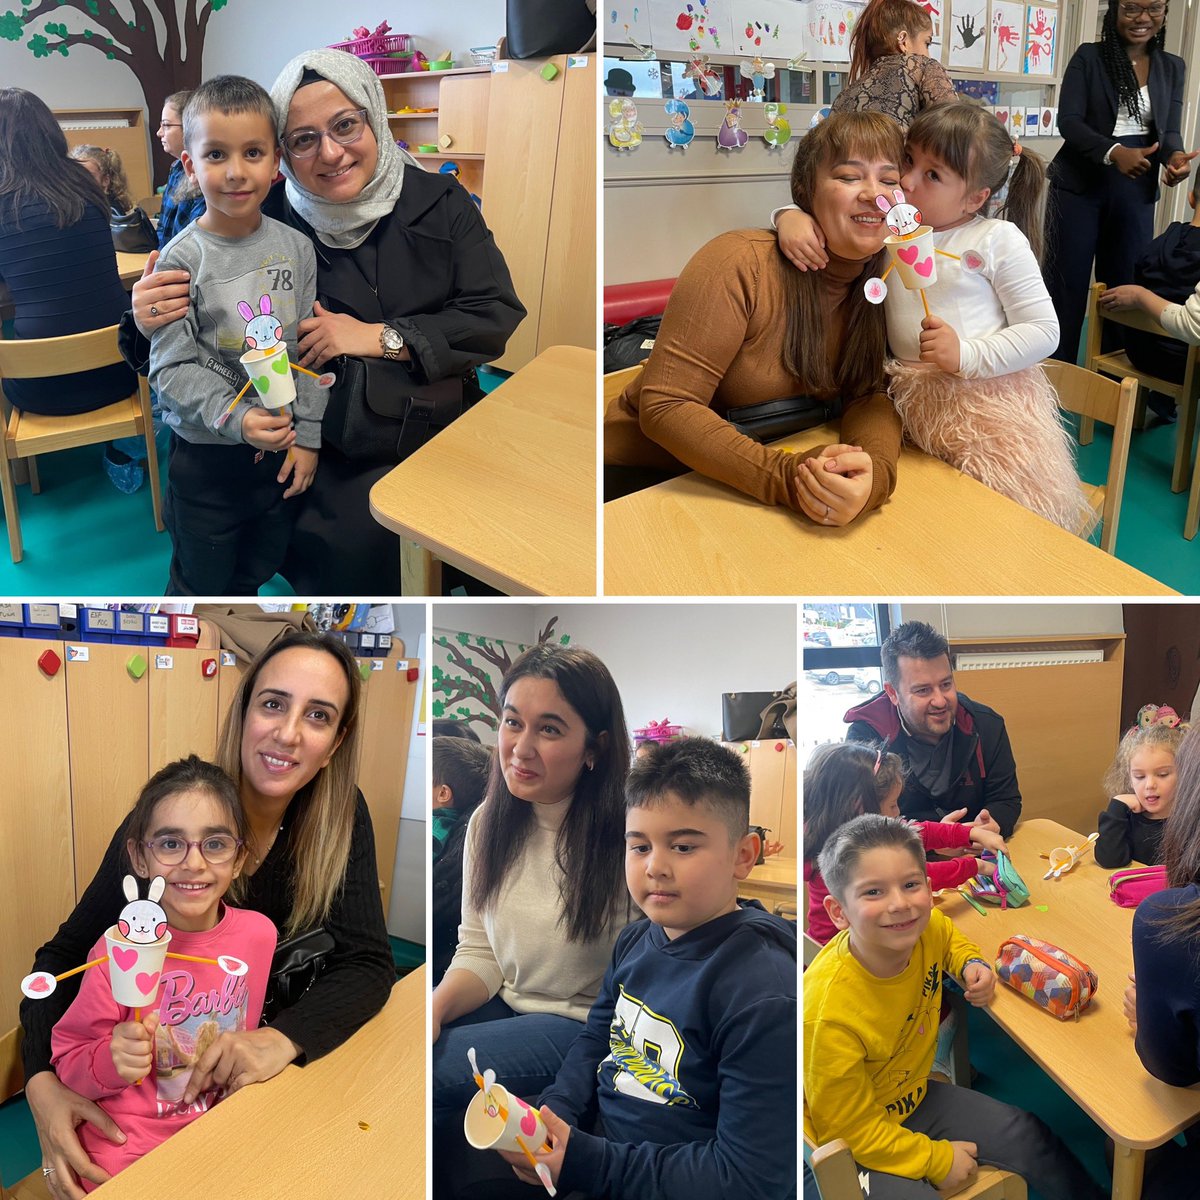 Parents enjoyed a cozy cup of coffee after their children showcased their impressive English skills at our school's 'Coffee Morning'event ☕️📚 #education #parentinvolvement #proudteachers'